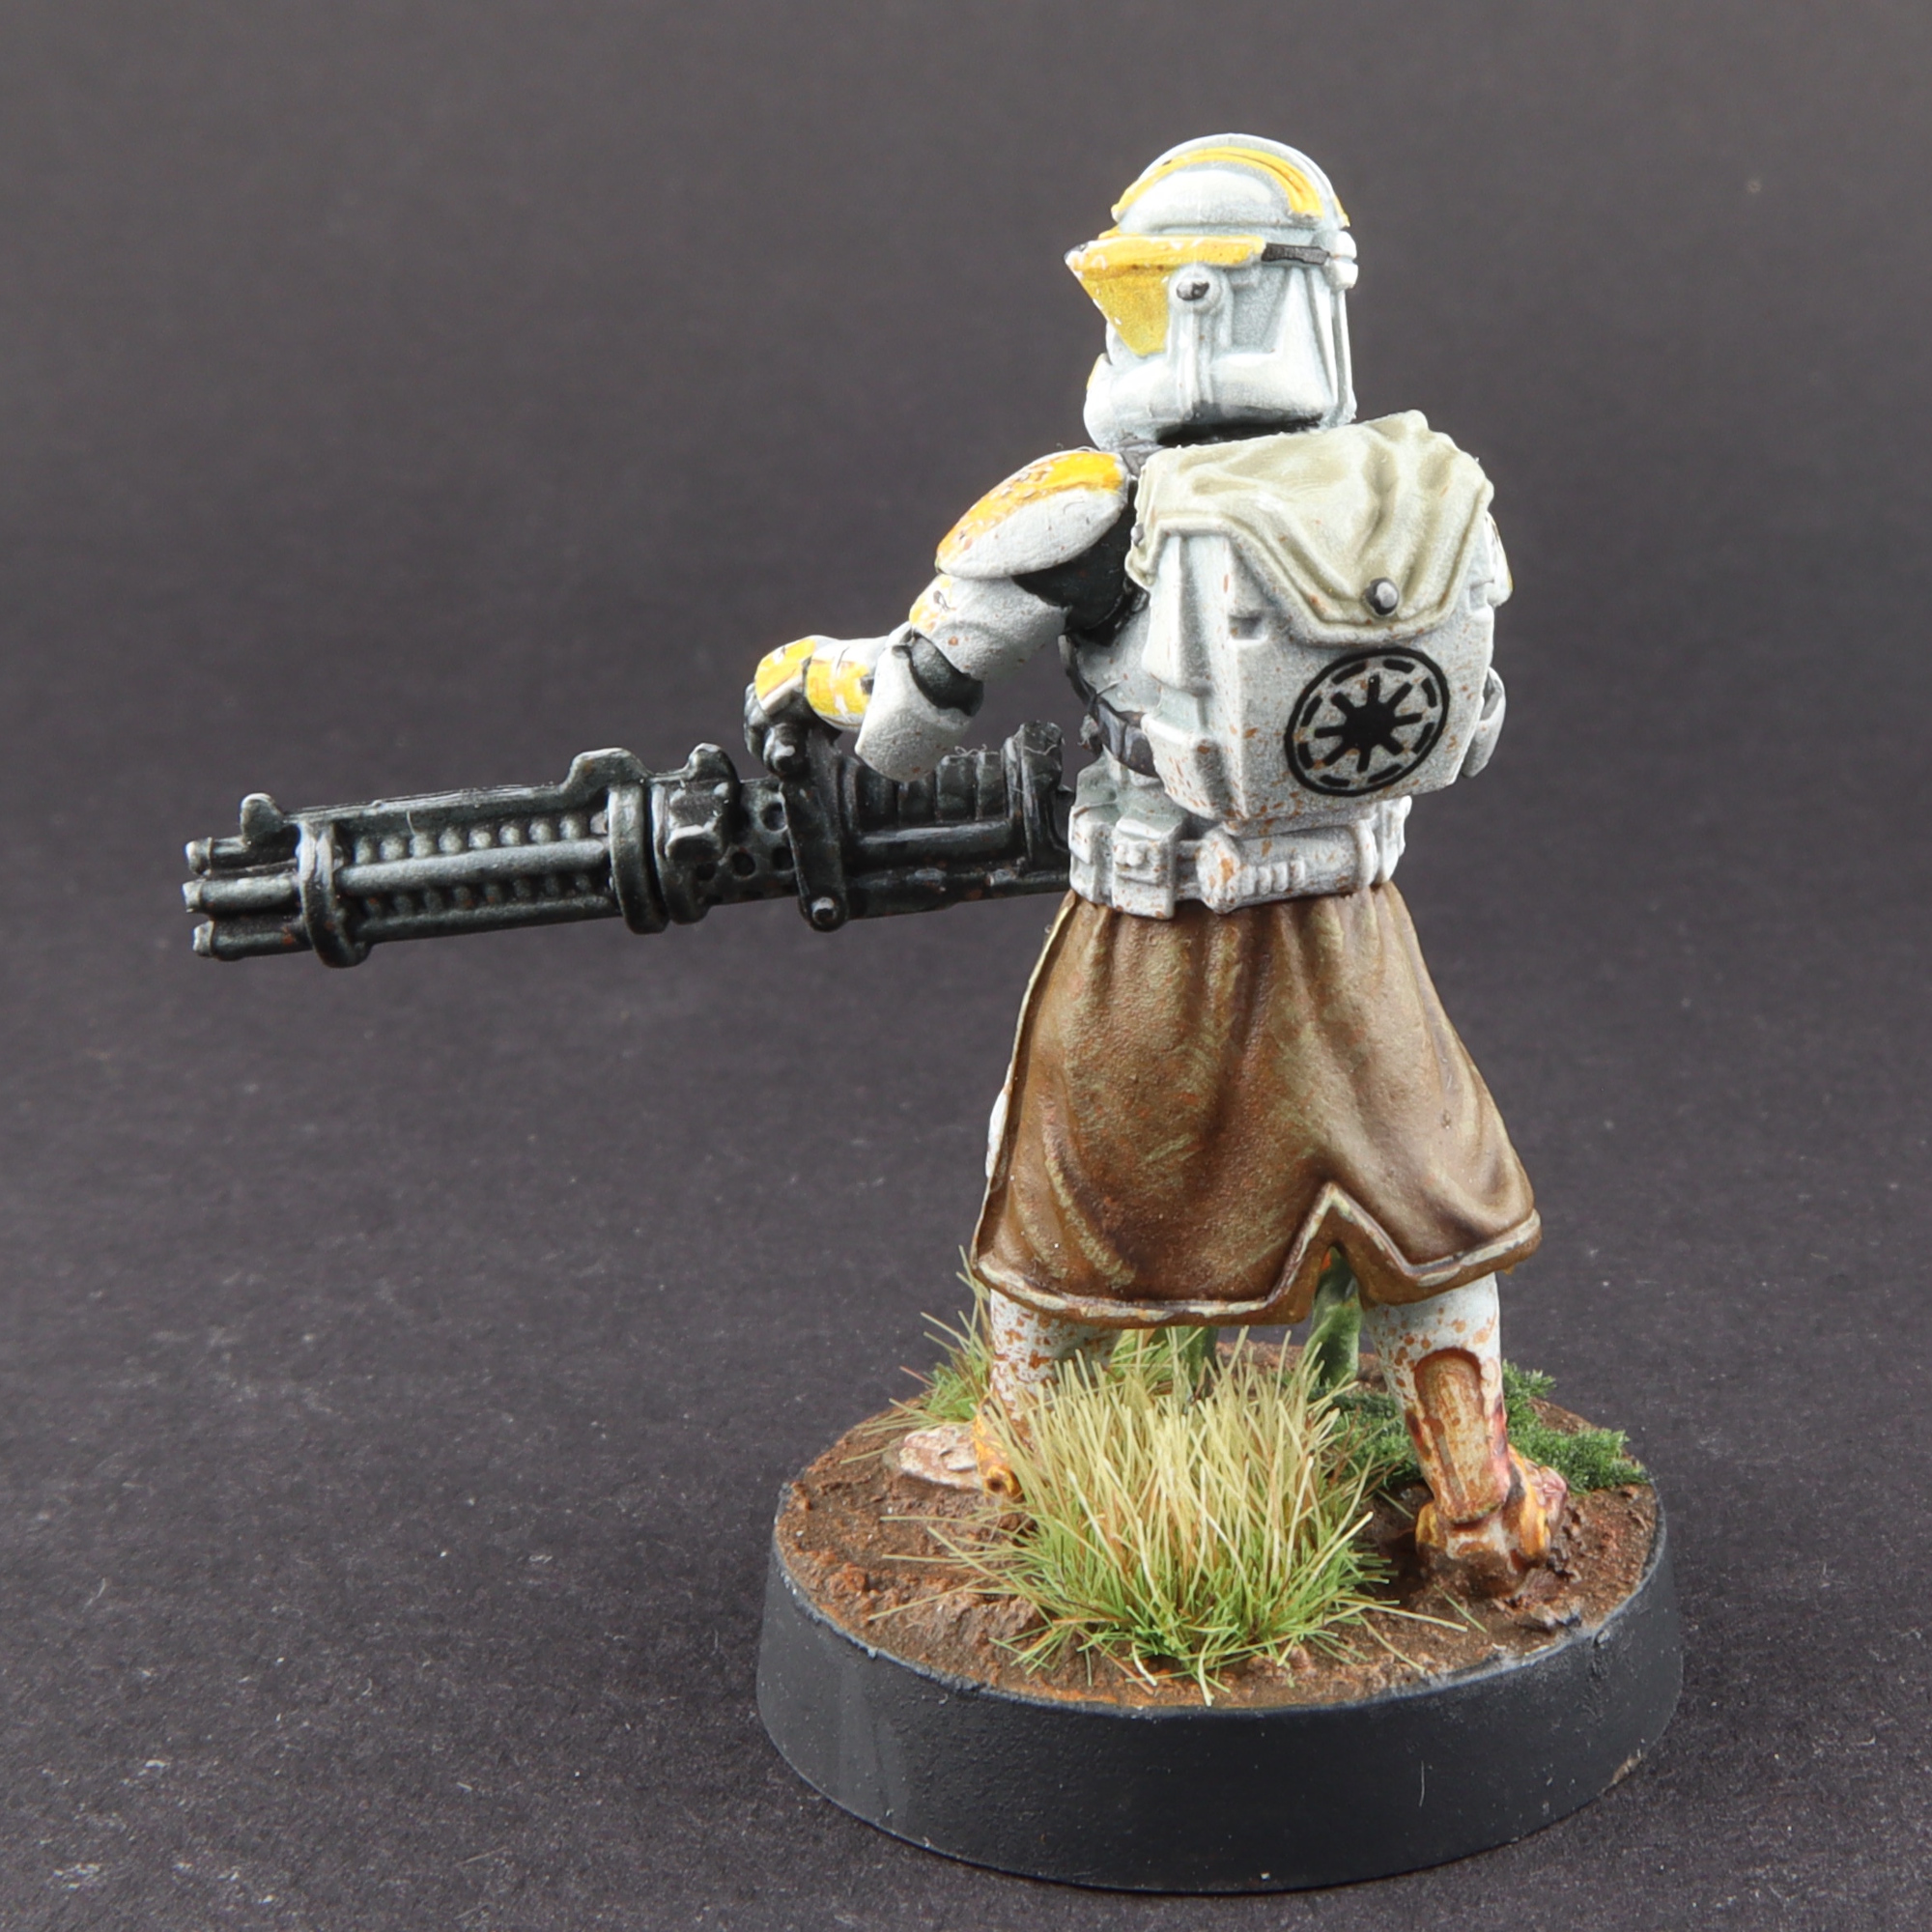 Star Wars Legion - Painted 327th Star Corps Clone with Z-6 miniature